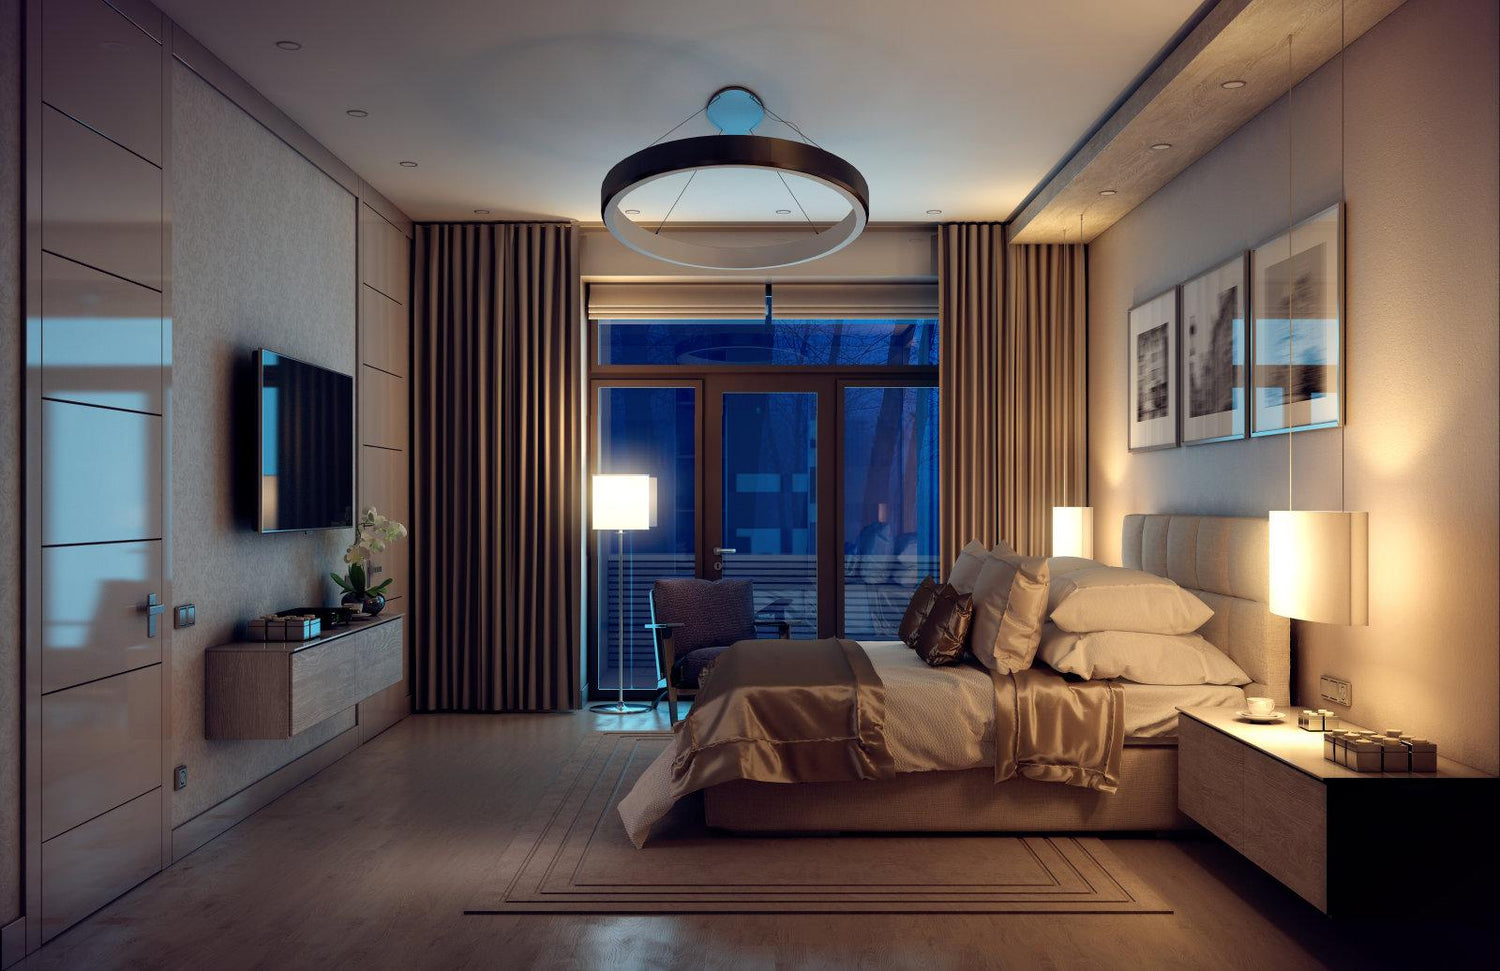 How to Choose the Perfect Lighting Fixtures for Your Bedroom?